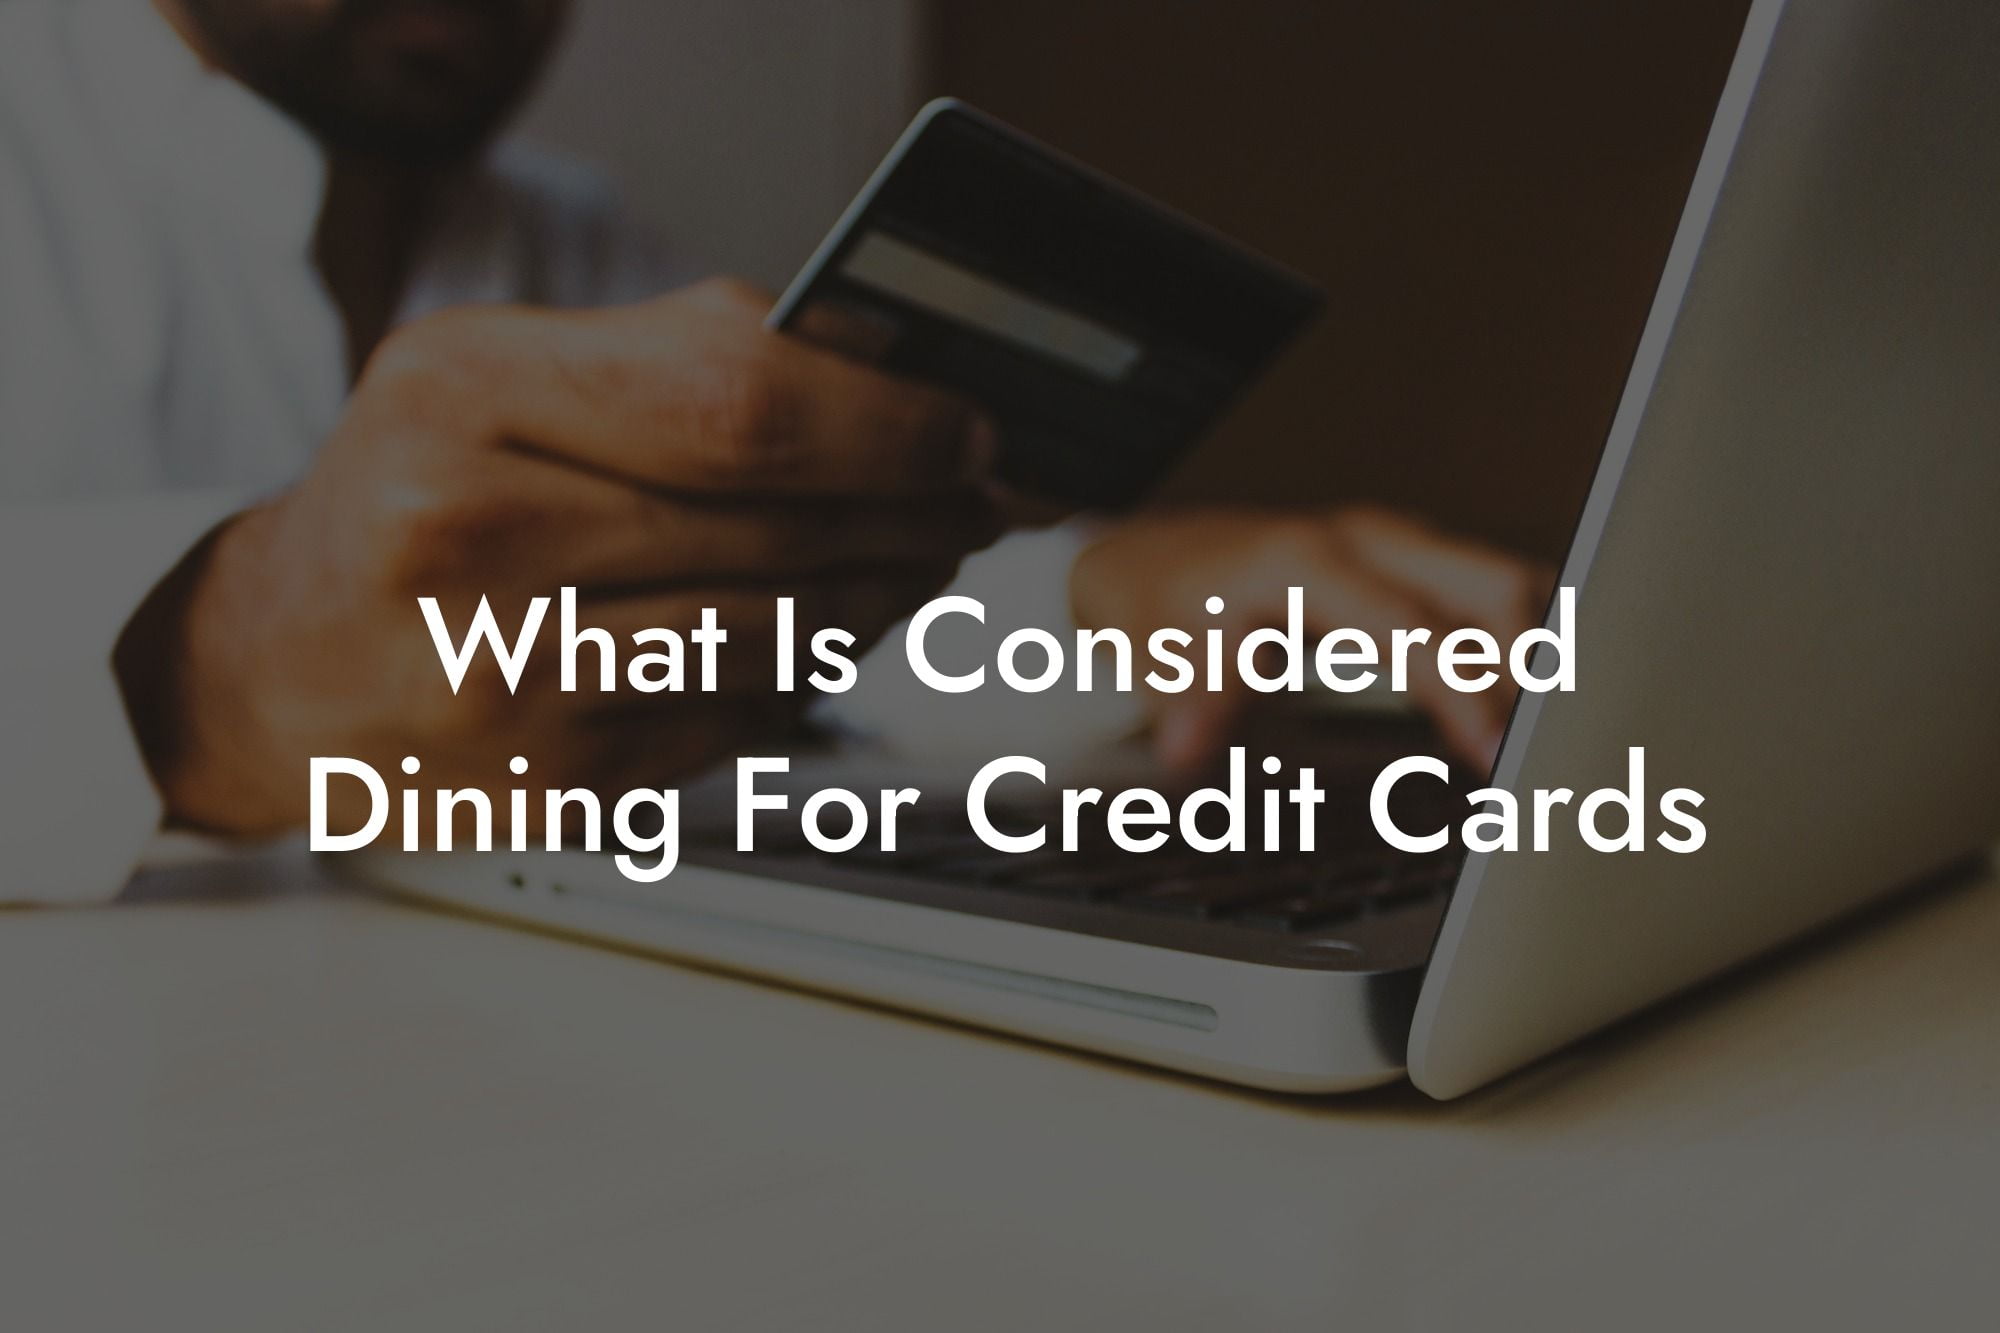 What Is Considered Dining For Credit Cards